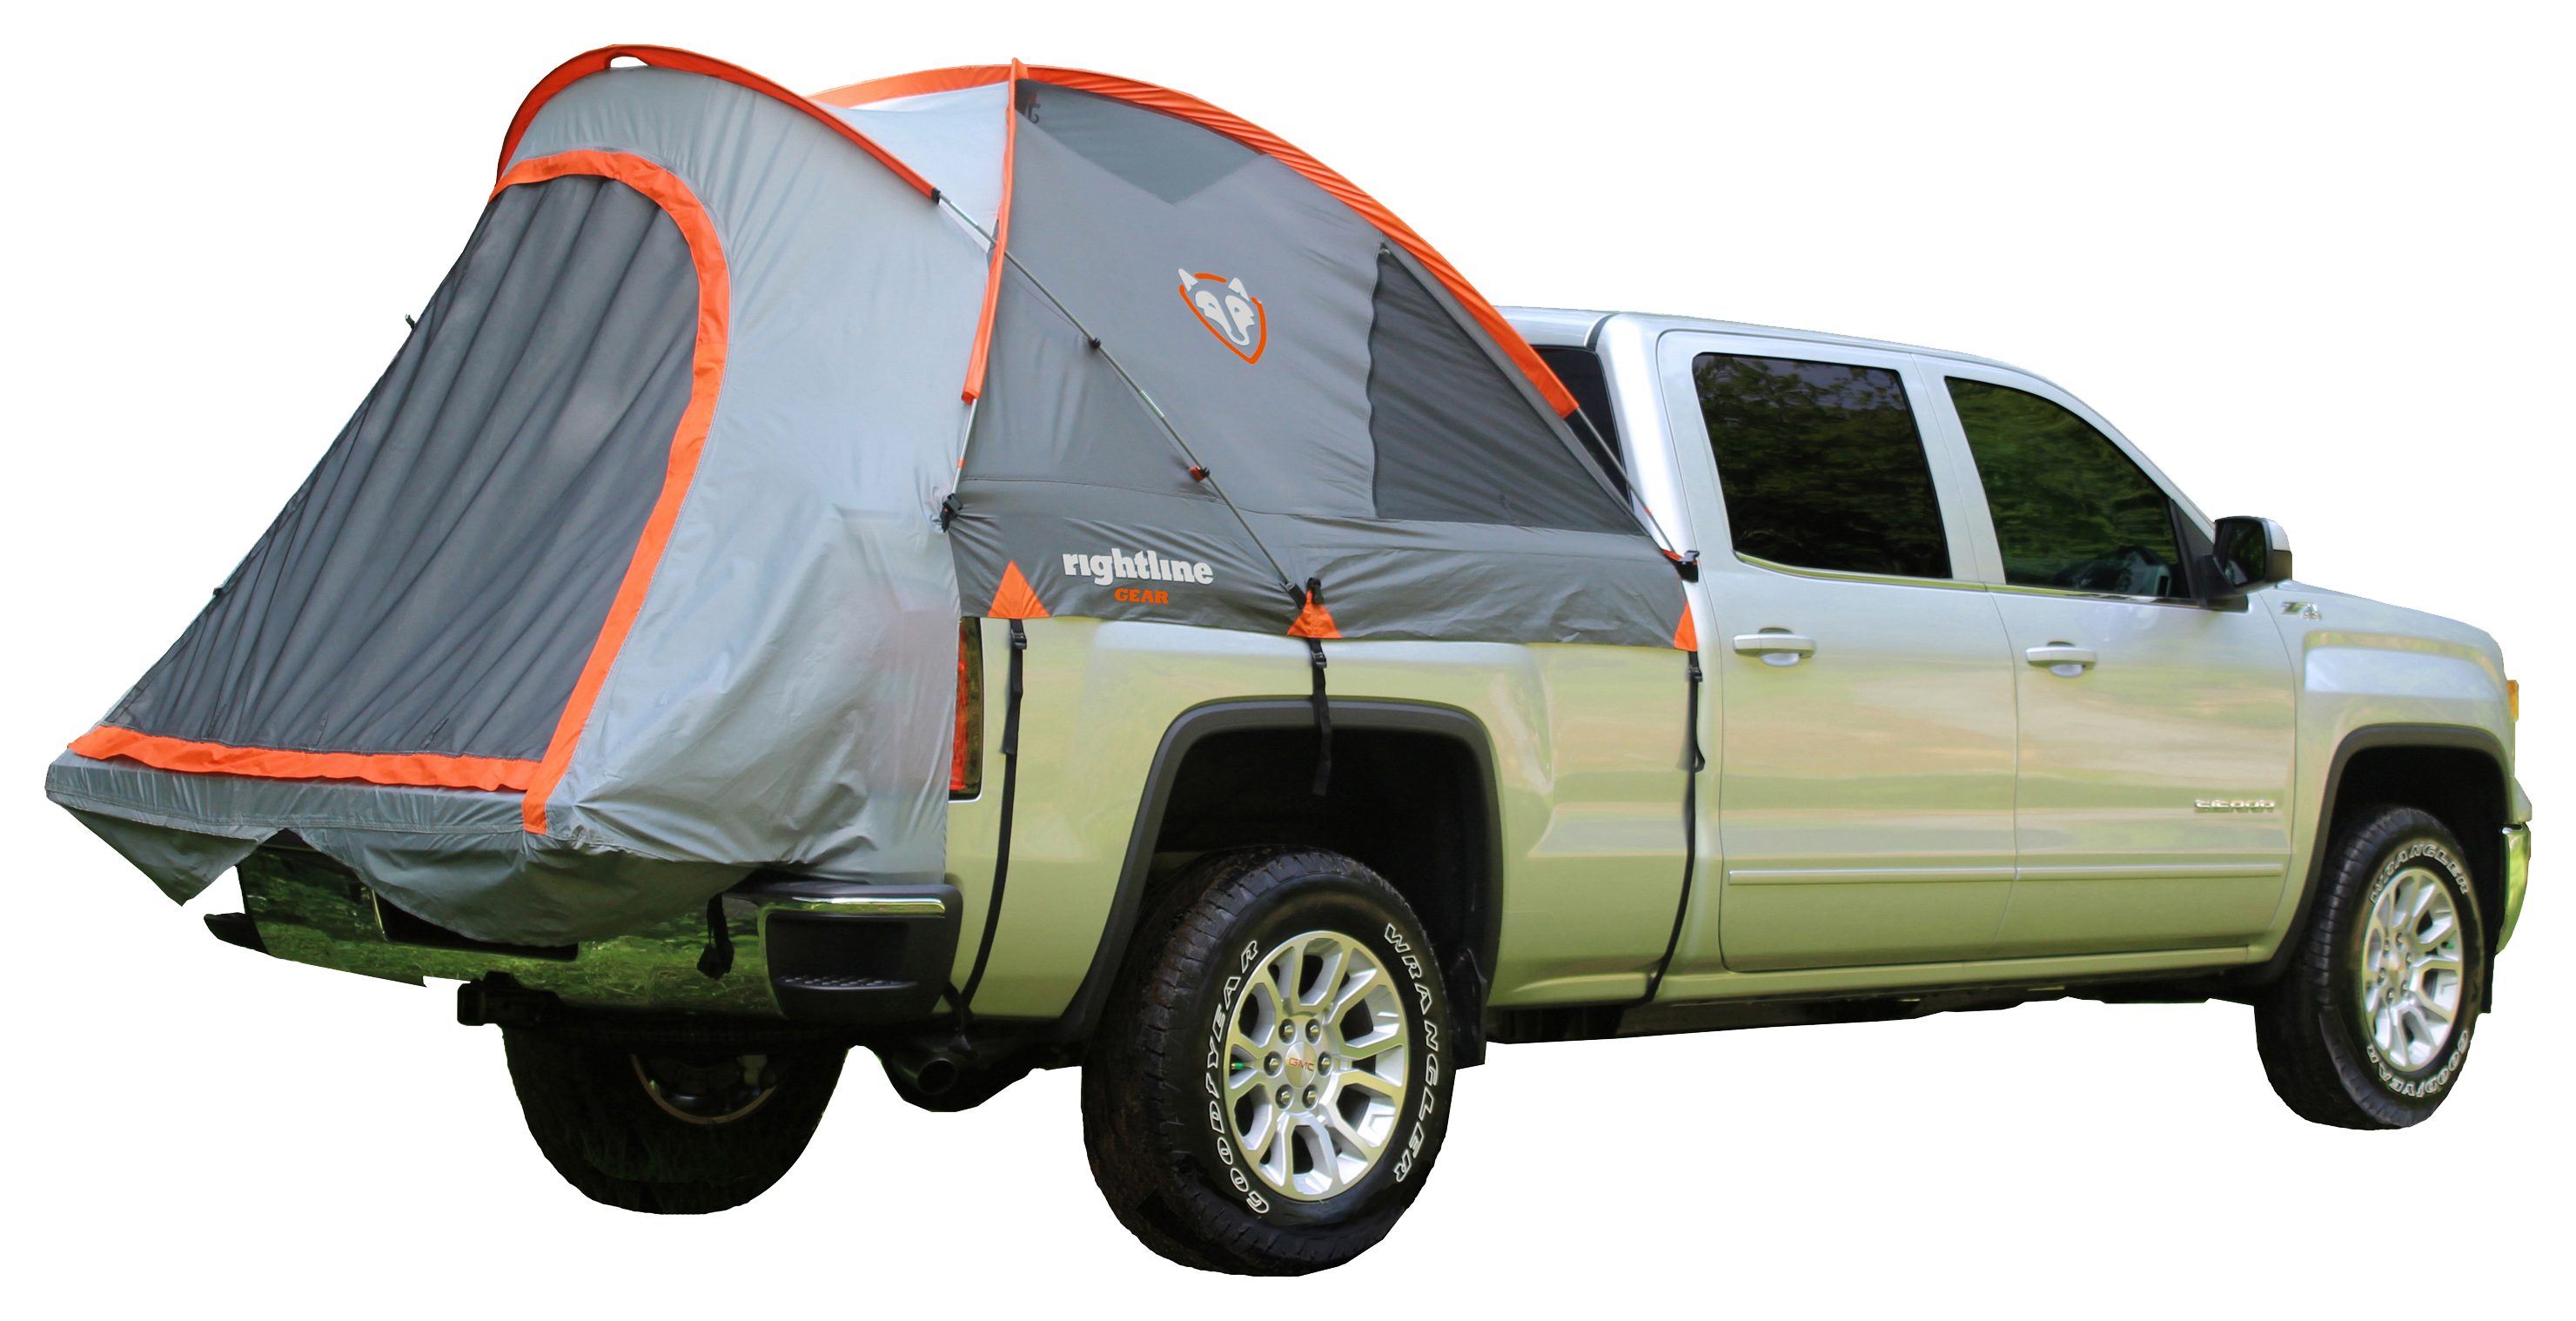 Rightline Gear 2-Person Truck Tent - Full Size Long-Bed